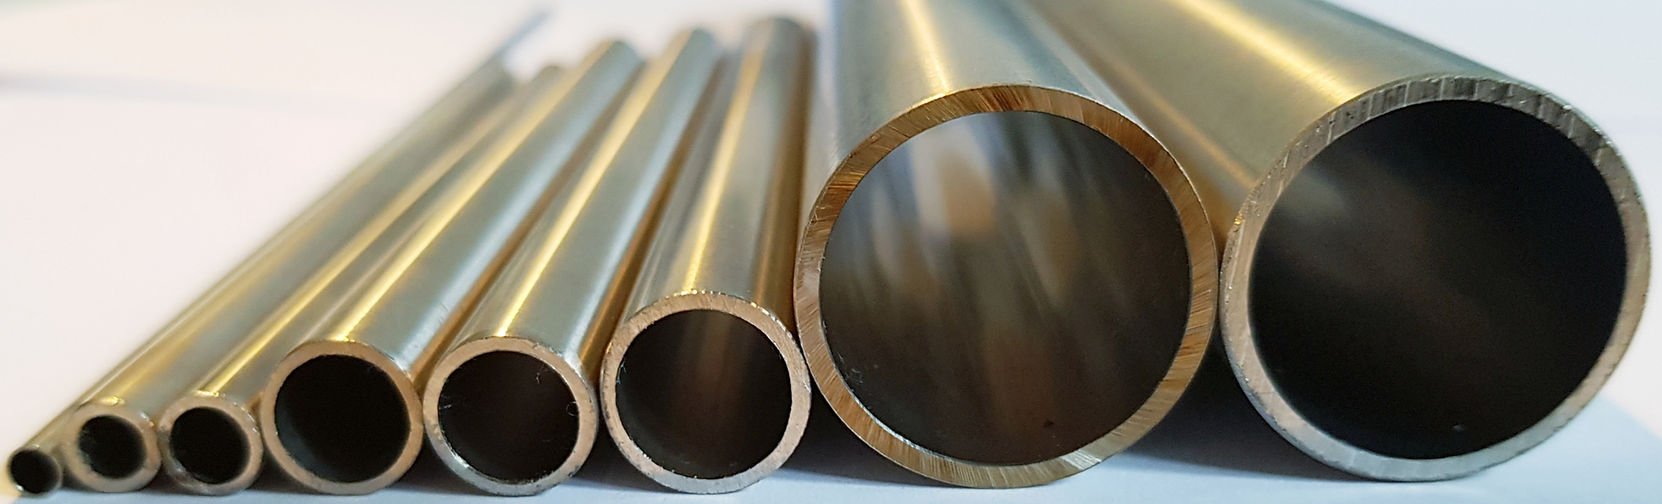 Bright annealed stainless steel tube